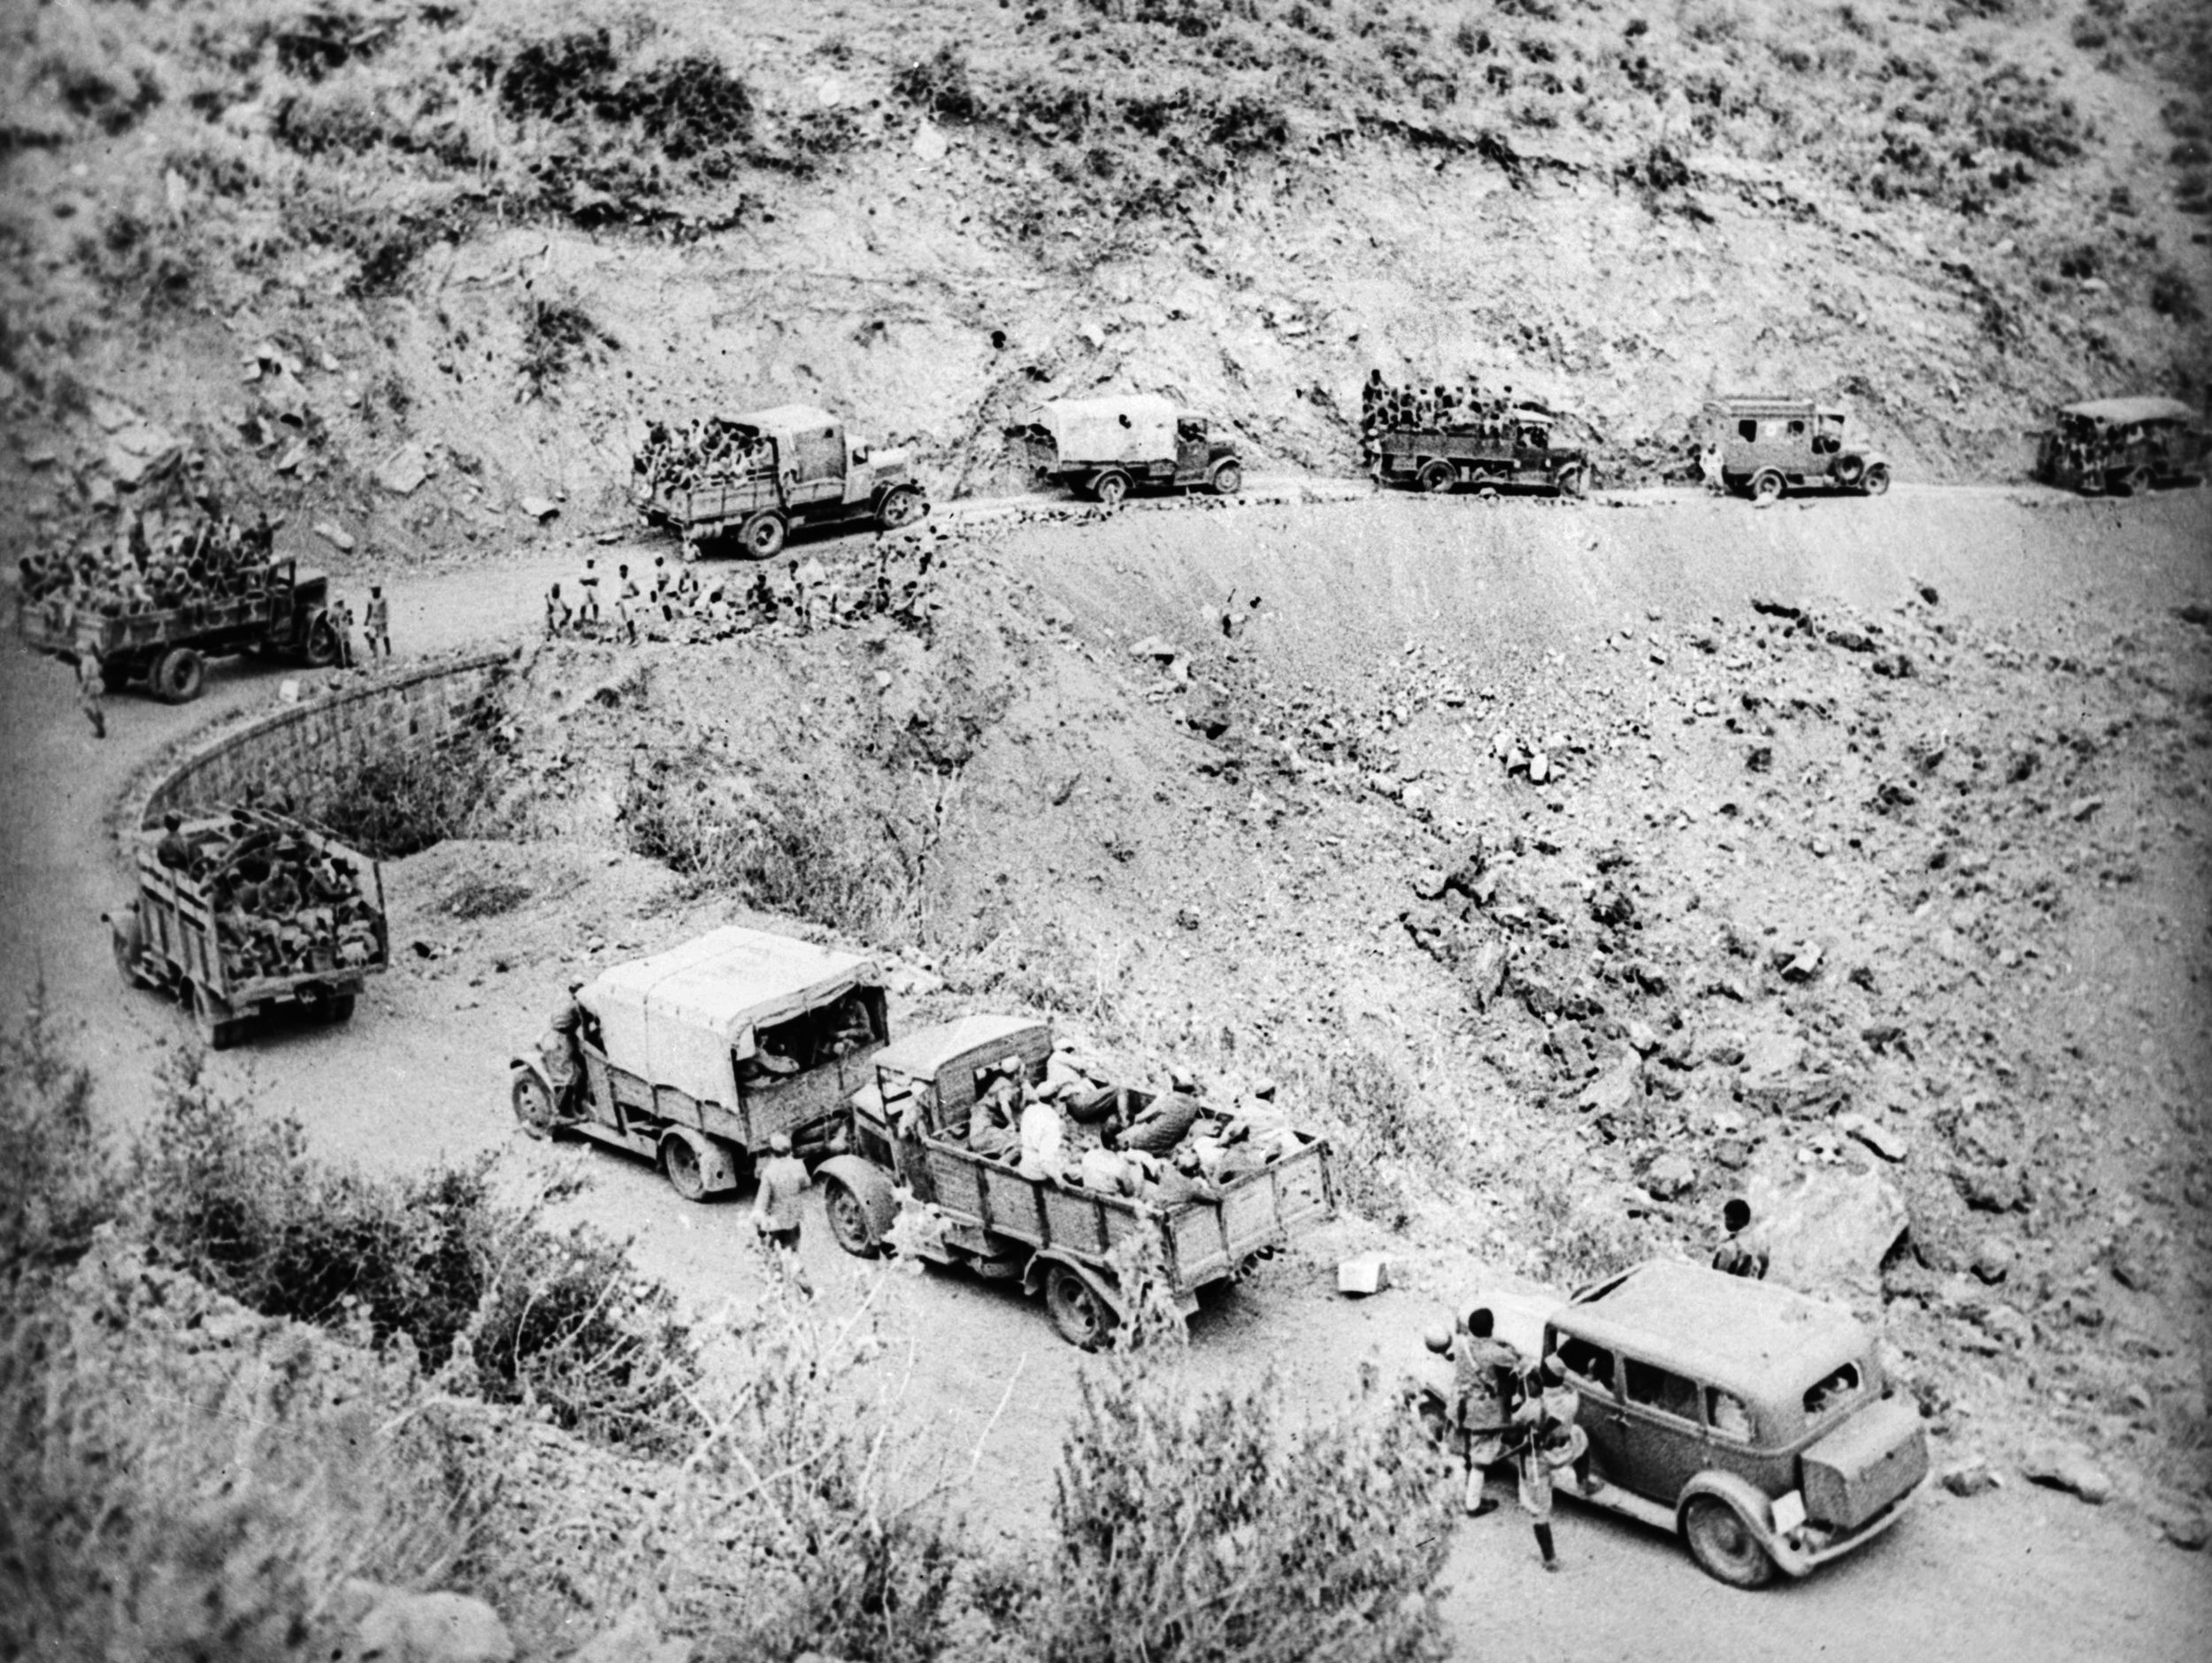 Aboard trucks descending a winding road in the rugged desert country of Ethiopia, South African soldiers move relentlessly forward in 1941. The South Africans were instrumental in achieving victory over the Italians.